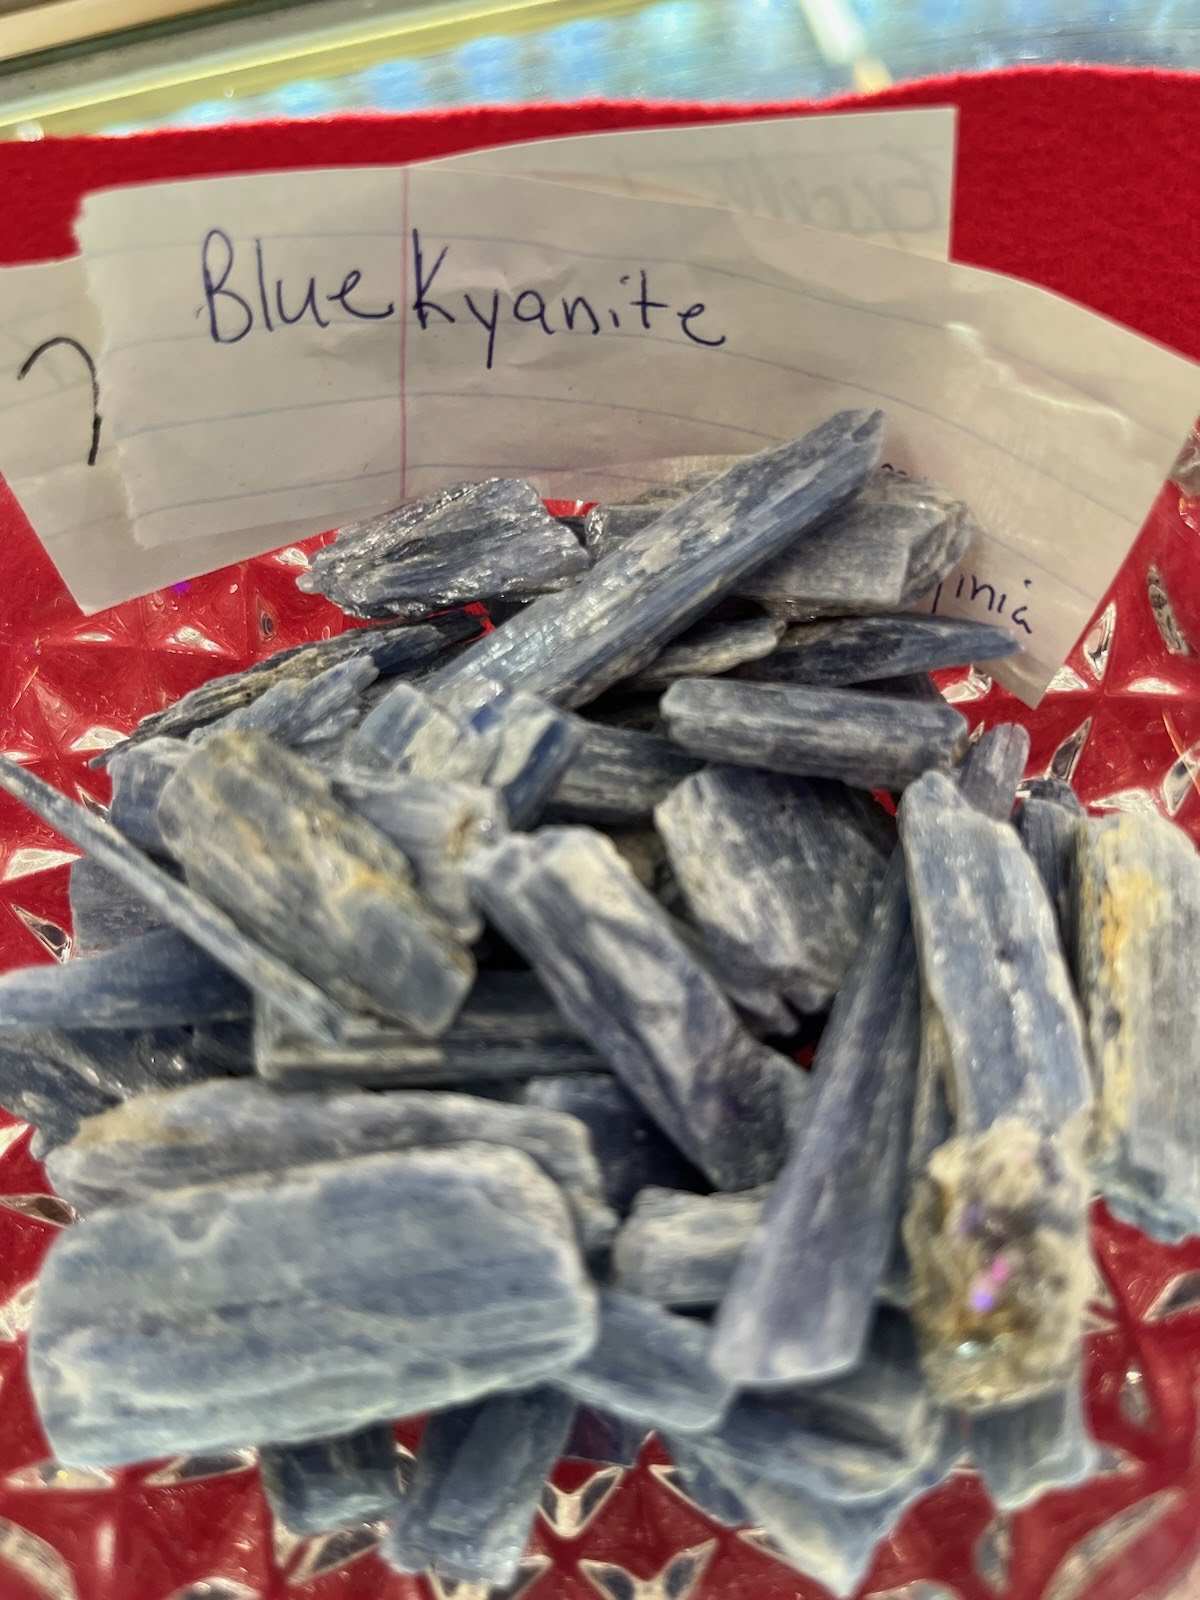 A pile of blue kyanite on top of a red table.